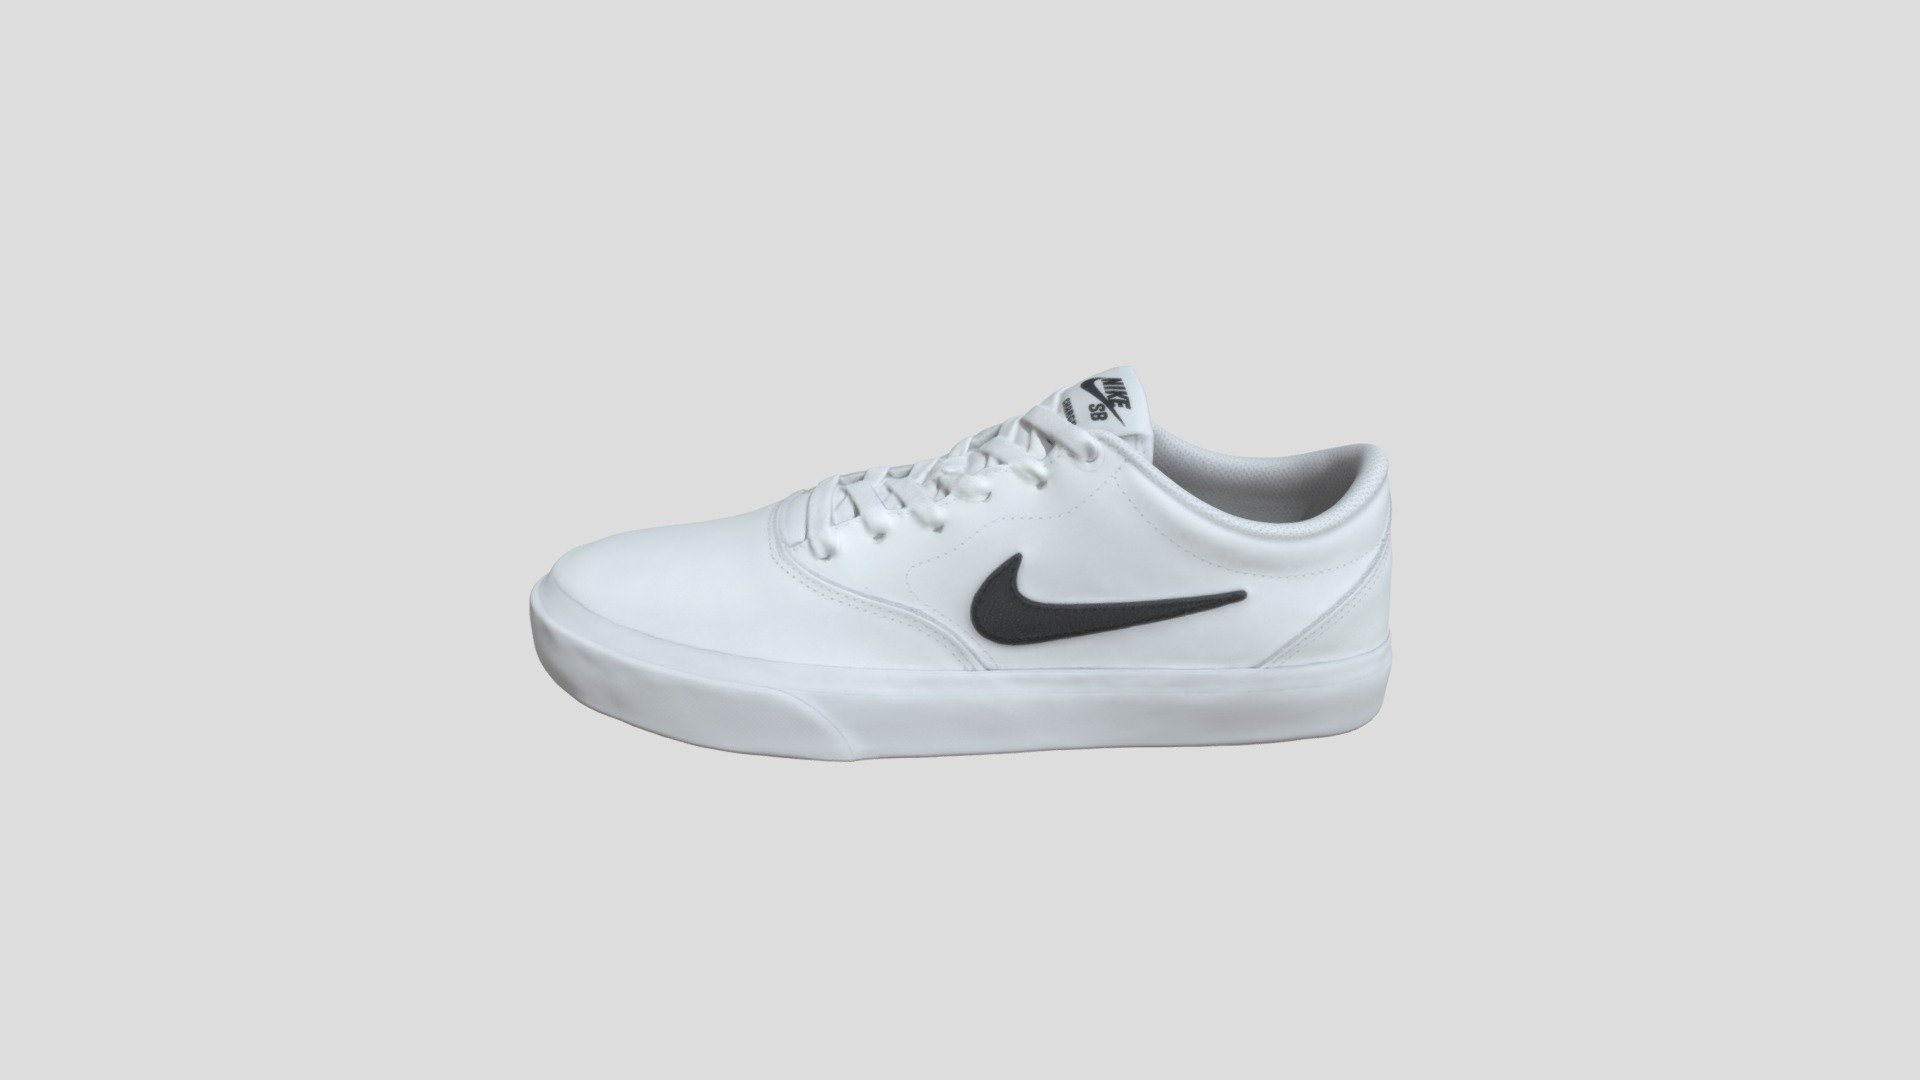 This model was created firstly by 3D scanning on retail version, and then being detail-improved manually, thus a 1:1 repulica of the original
PBR ready
Low-poly
4K texture
Welcome to check out other models we have to offer. And we do accept custom orders as well :) - Nike SB Chron SLR 白黑_DA5493-100 - Buy Royalty Free 3D model by TRARGUS 3d model